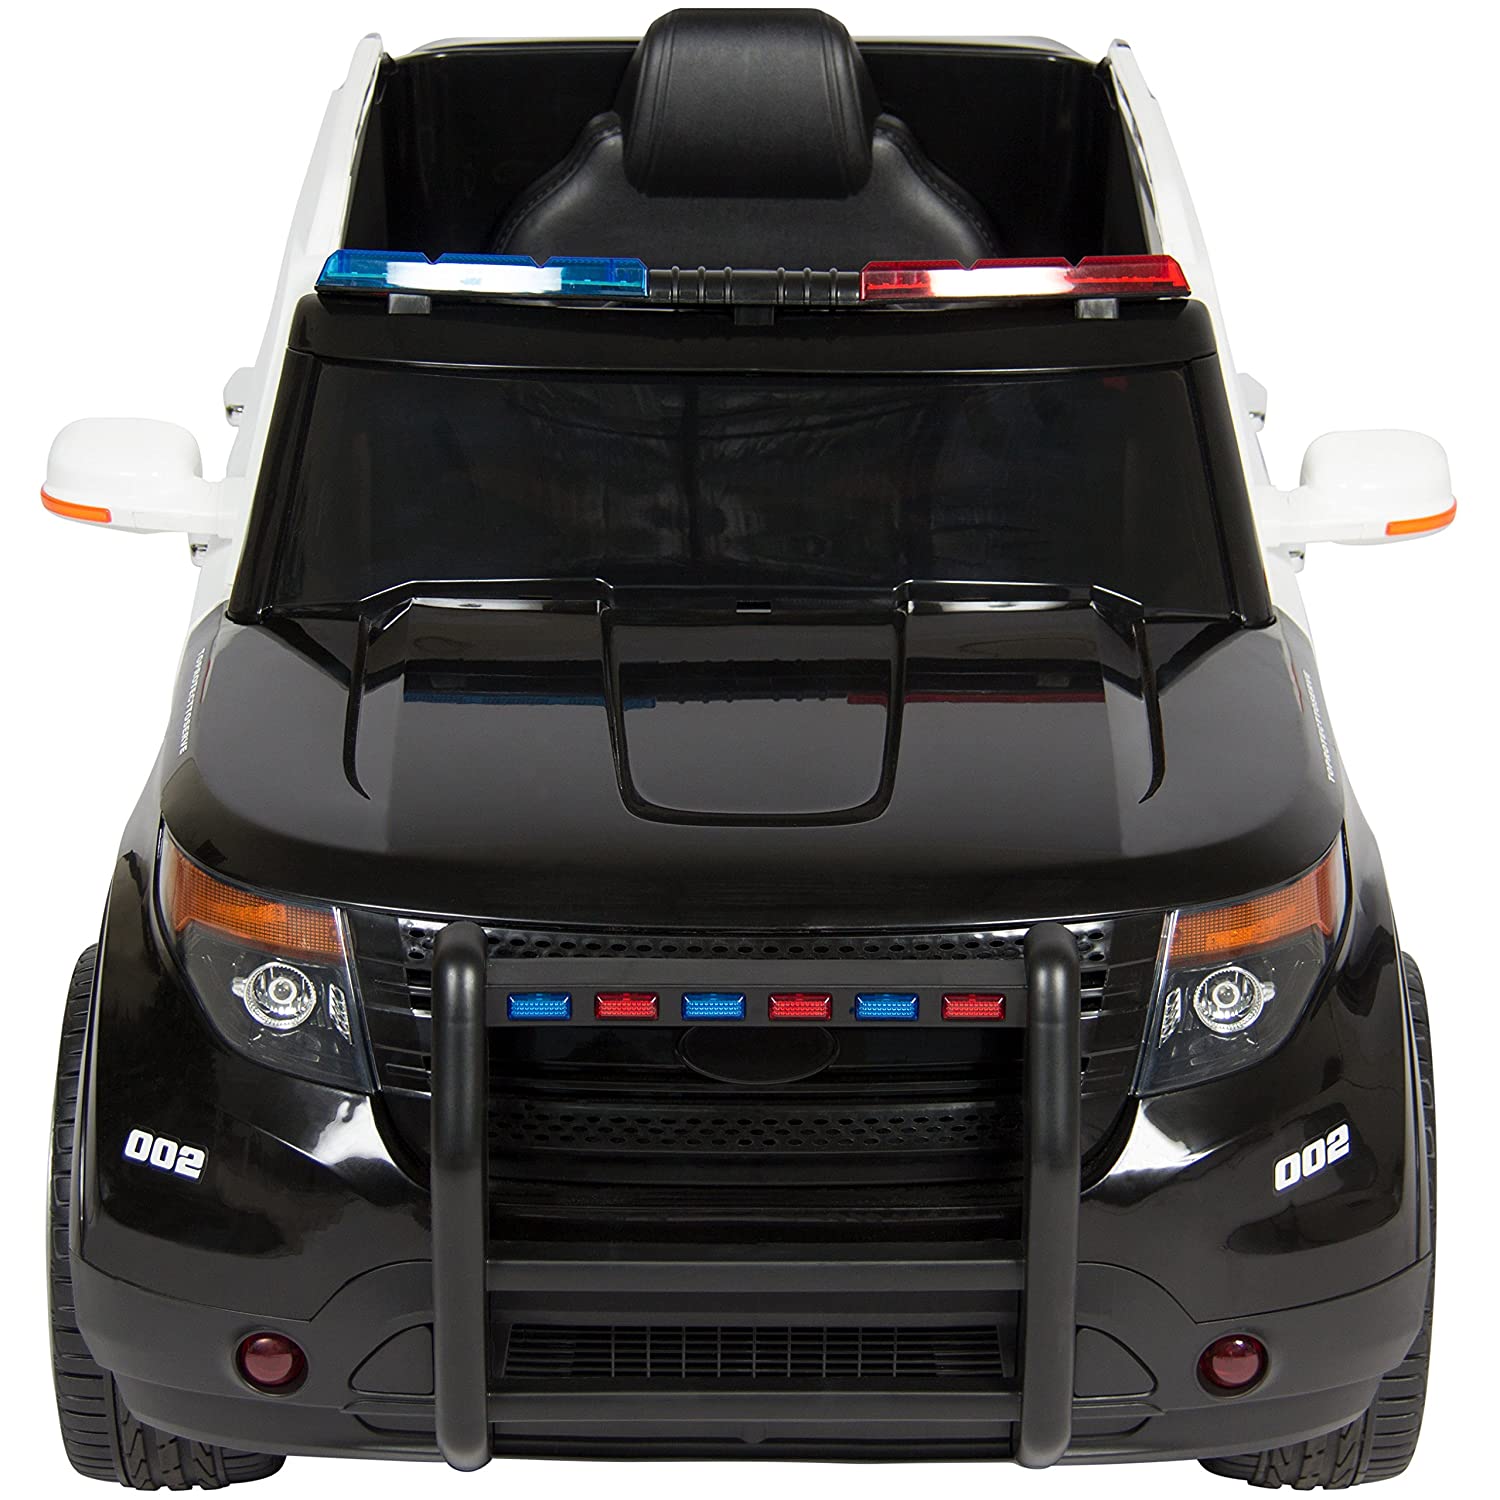 2023 Ford Explorer Police Car | 1 Seater > 12V (2x2) | Electric Riding Vehicle for Kids